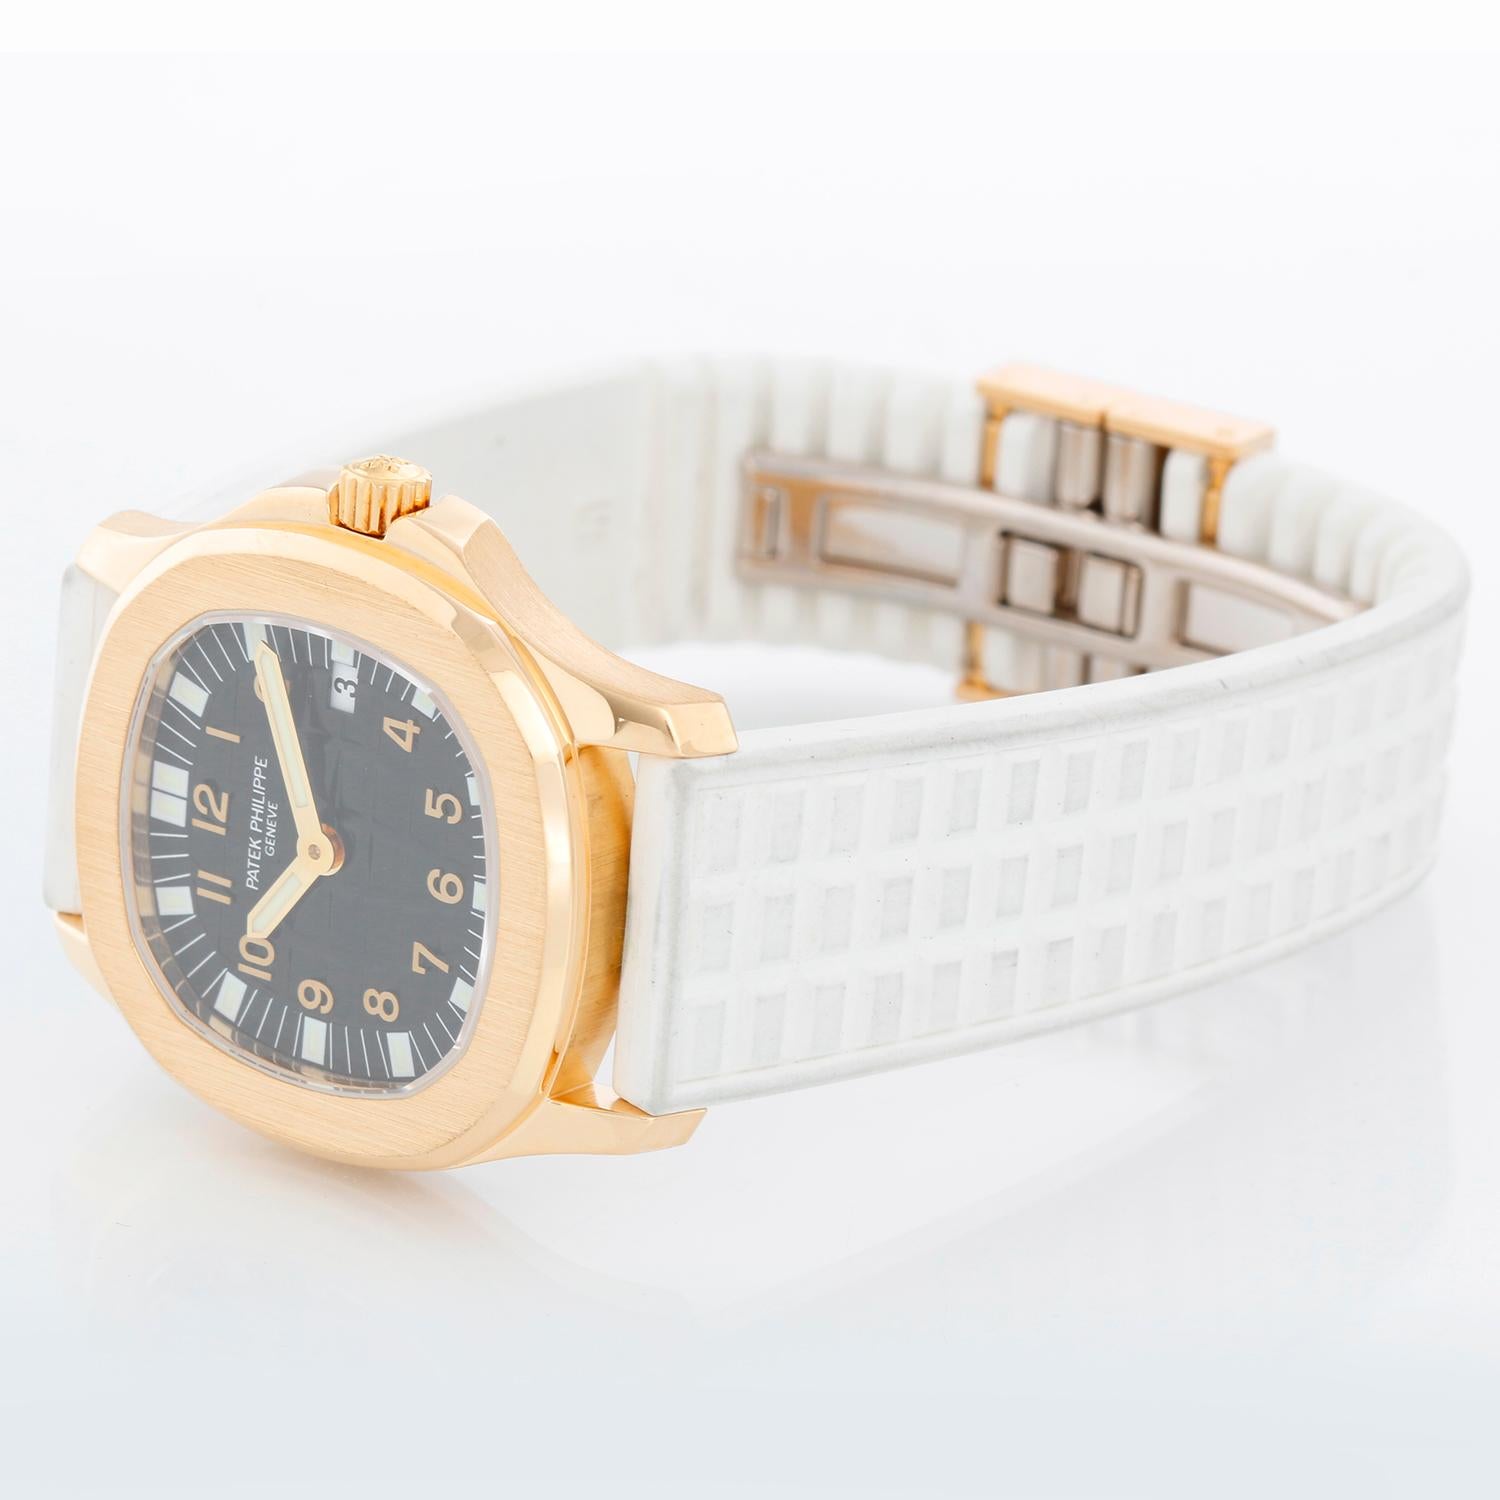 Patek Philippe Aquanaut 18K Yellow Gold Watch 4960 J - Quartz. 18K Yellow gold ( 30 mm ). Black dial with Arabic numerals. White rubber strap  band with 18k yellow gold Patek Philippe deployant clasp. Pre-owned with Patek box .